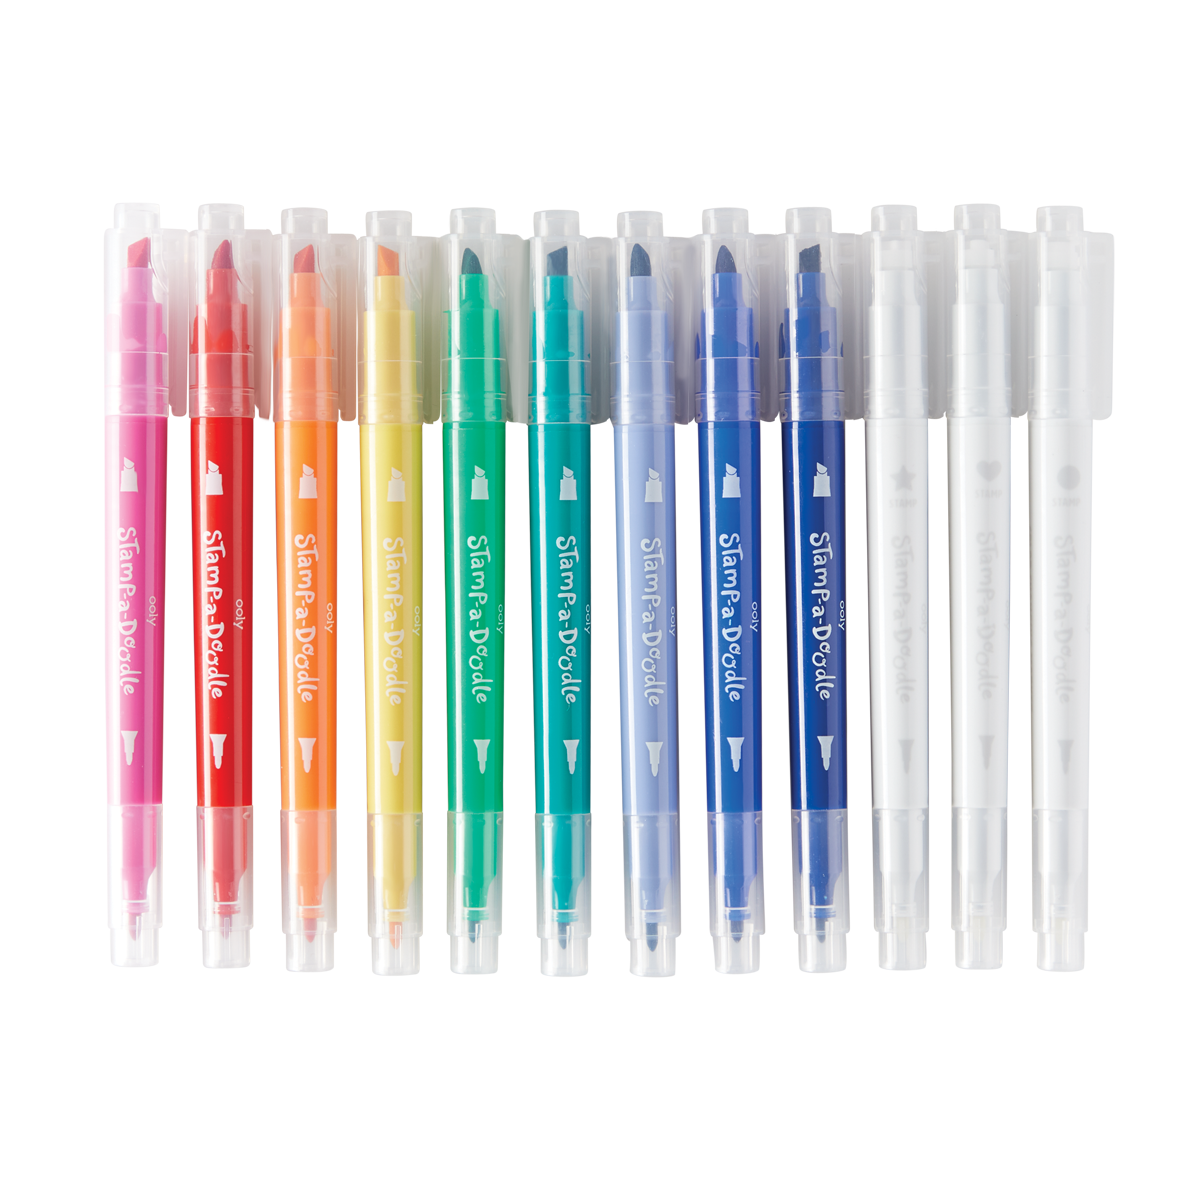 VIVID POP! WATER BASED PAINT MARKERS - The Toy Book